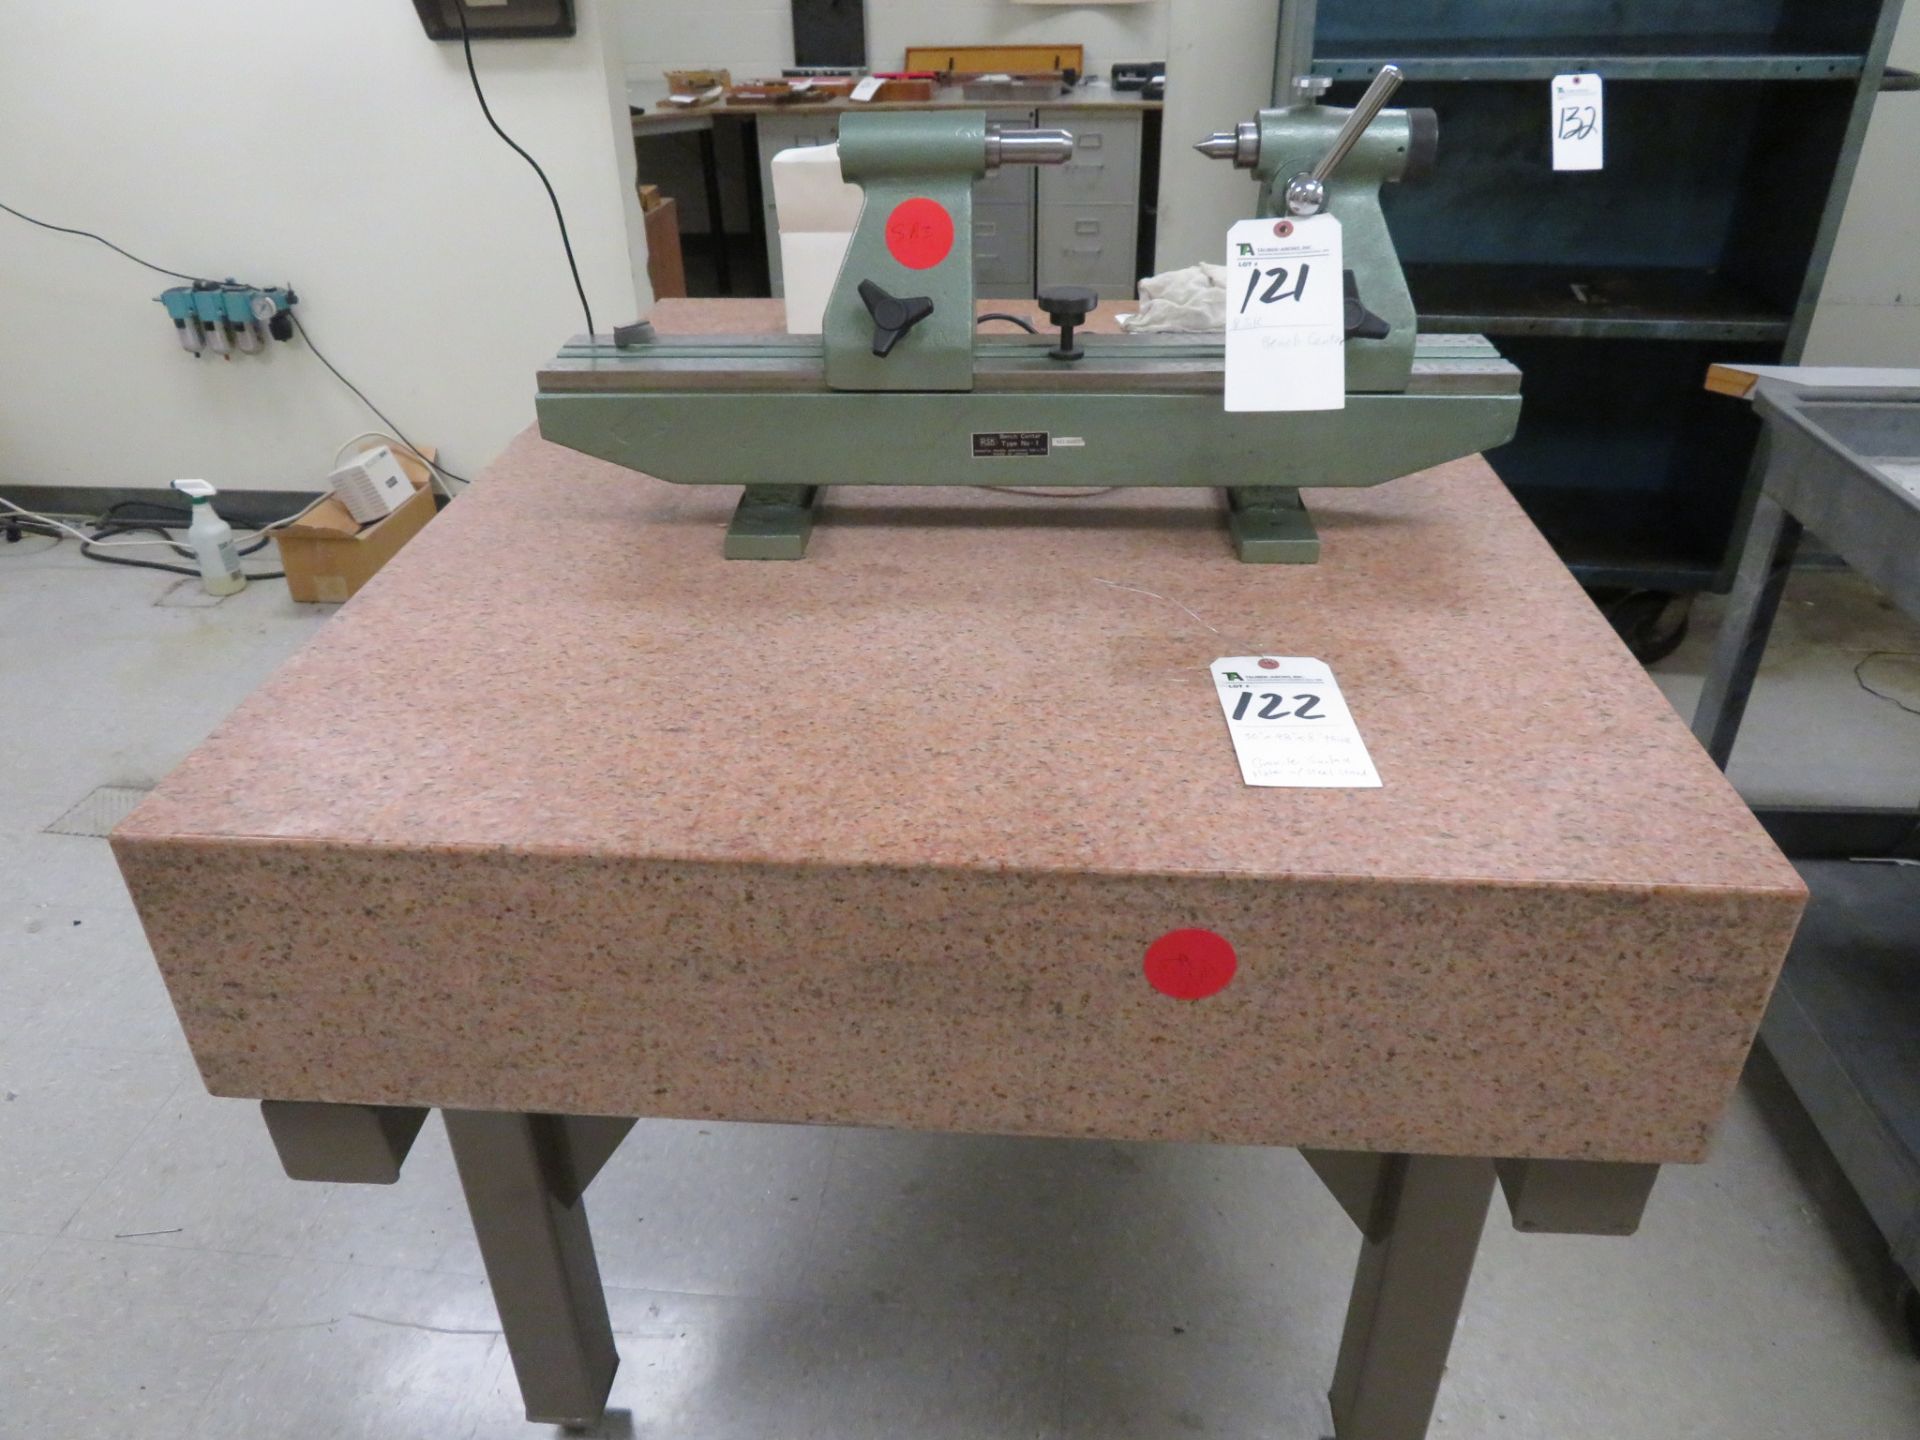 36" x 48" x 8" Thick Granite Surface Plate w/ Steel Stand